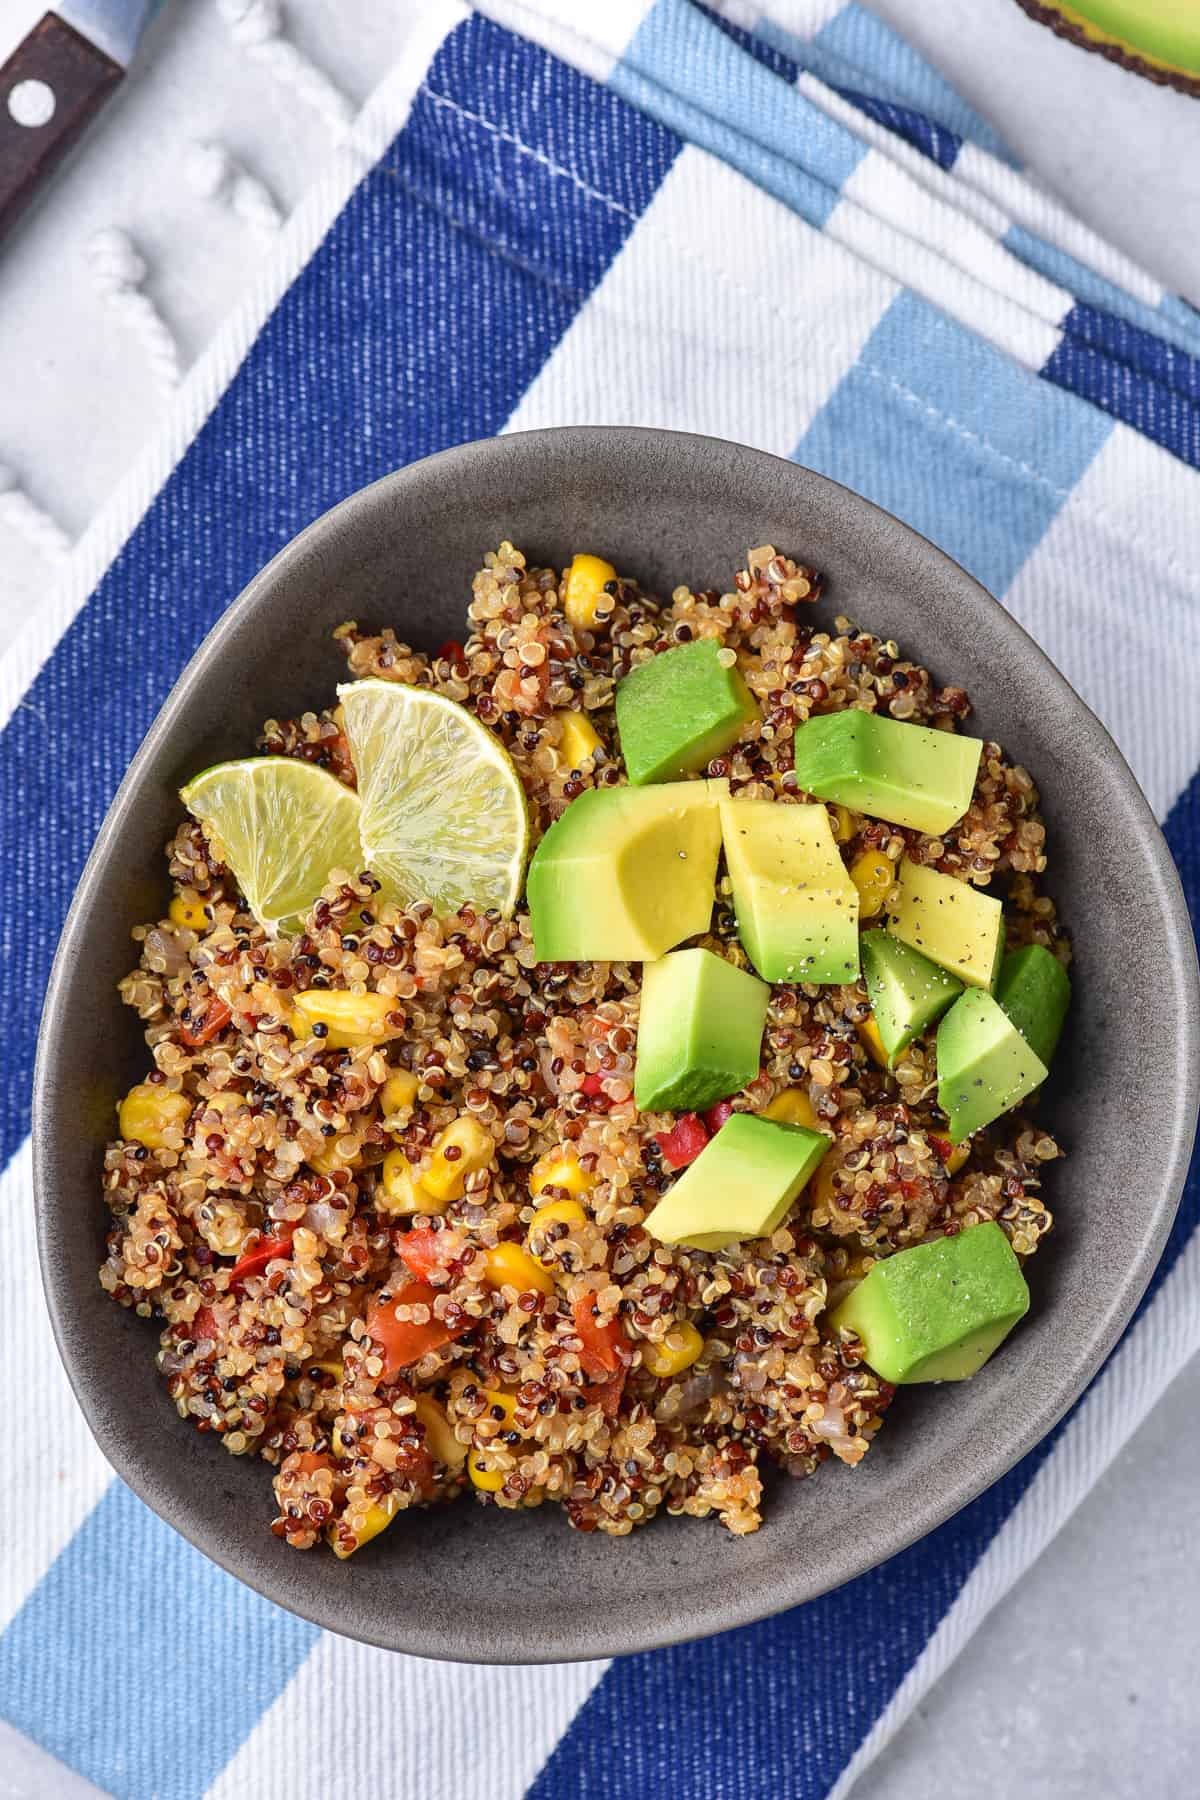 Mexican Quinoa made in one pot served in a gray bowl garnished with lime and avocado.